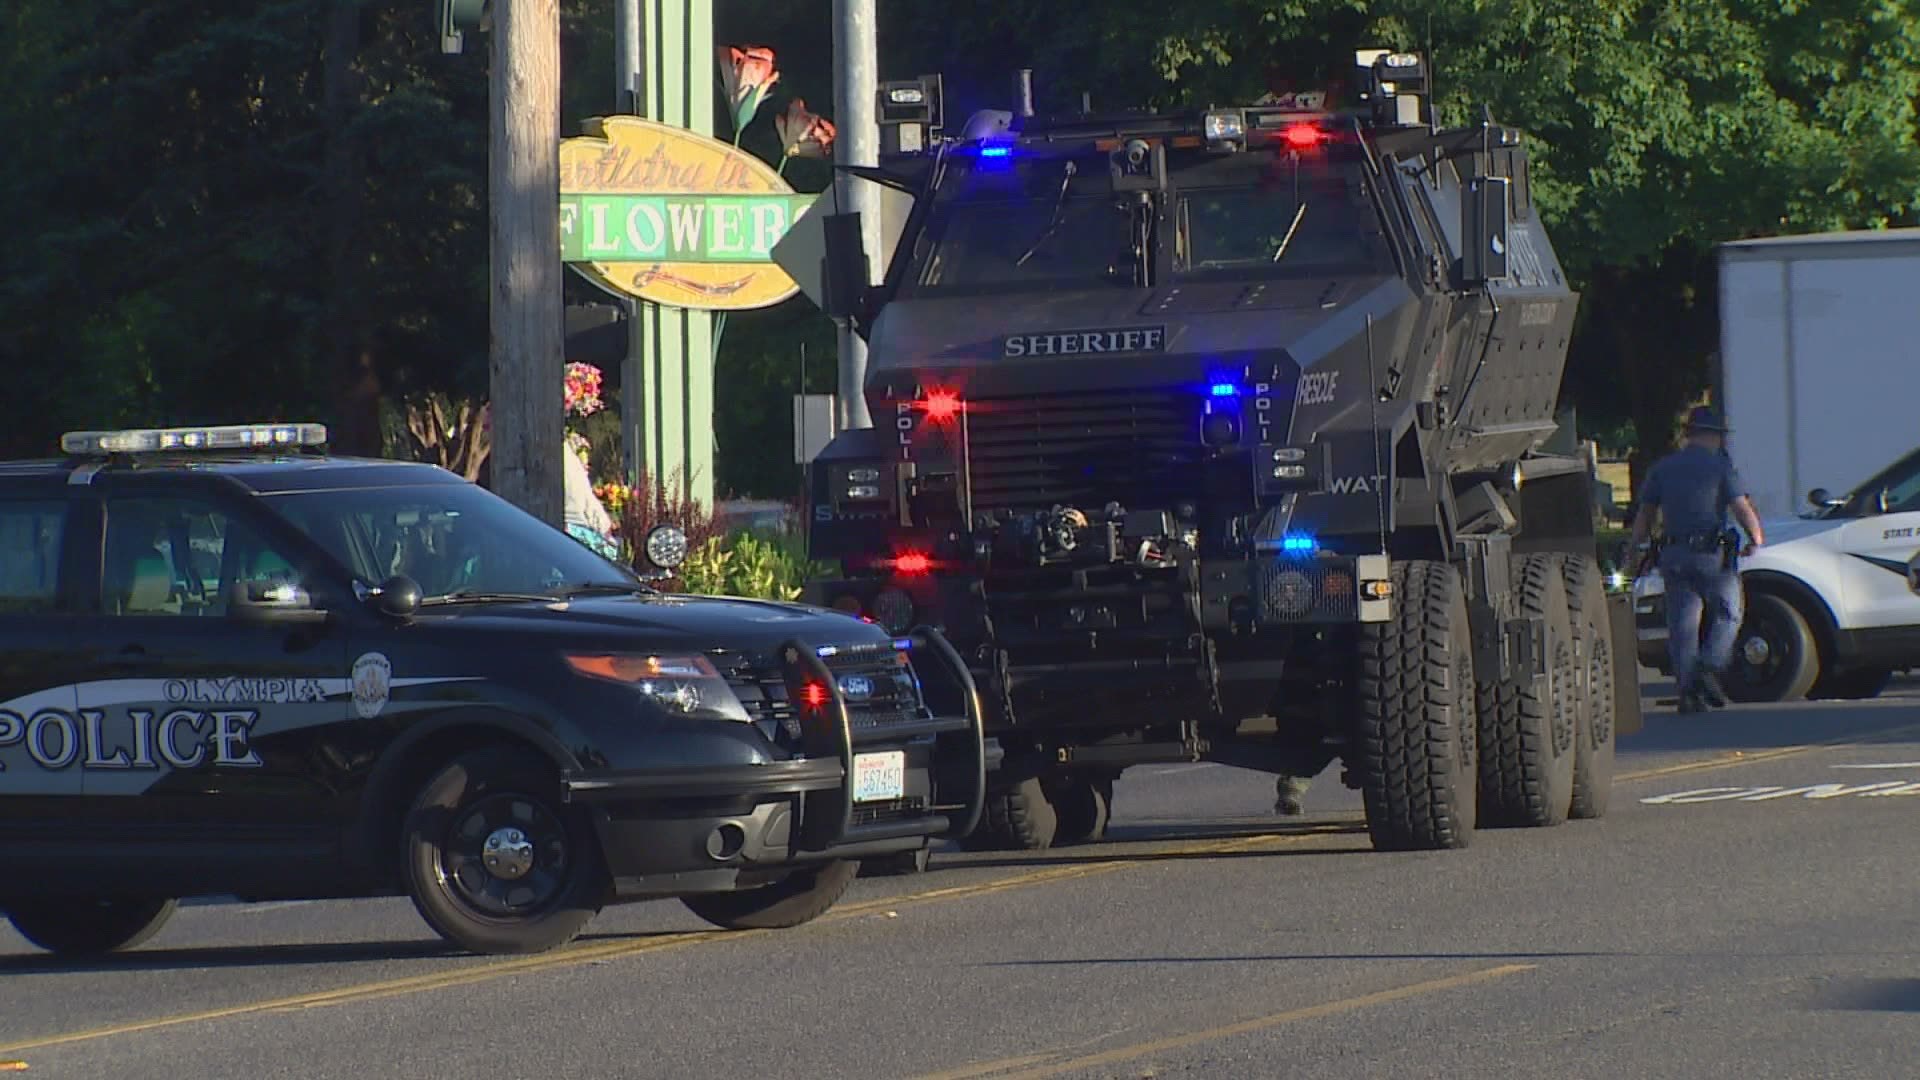 A ban on police use of armored military vehicles, or MRAPs, has been dropped from a proposed state law that would restrict some law enforcement procedures.